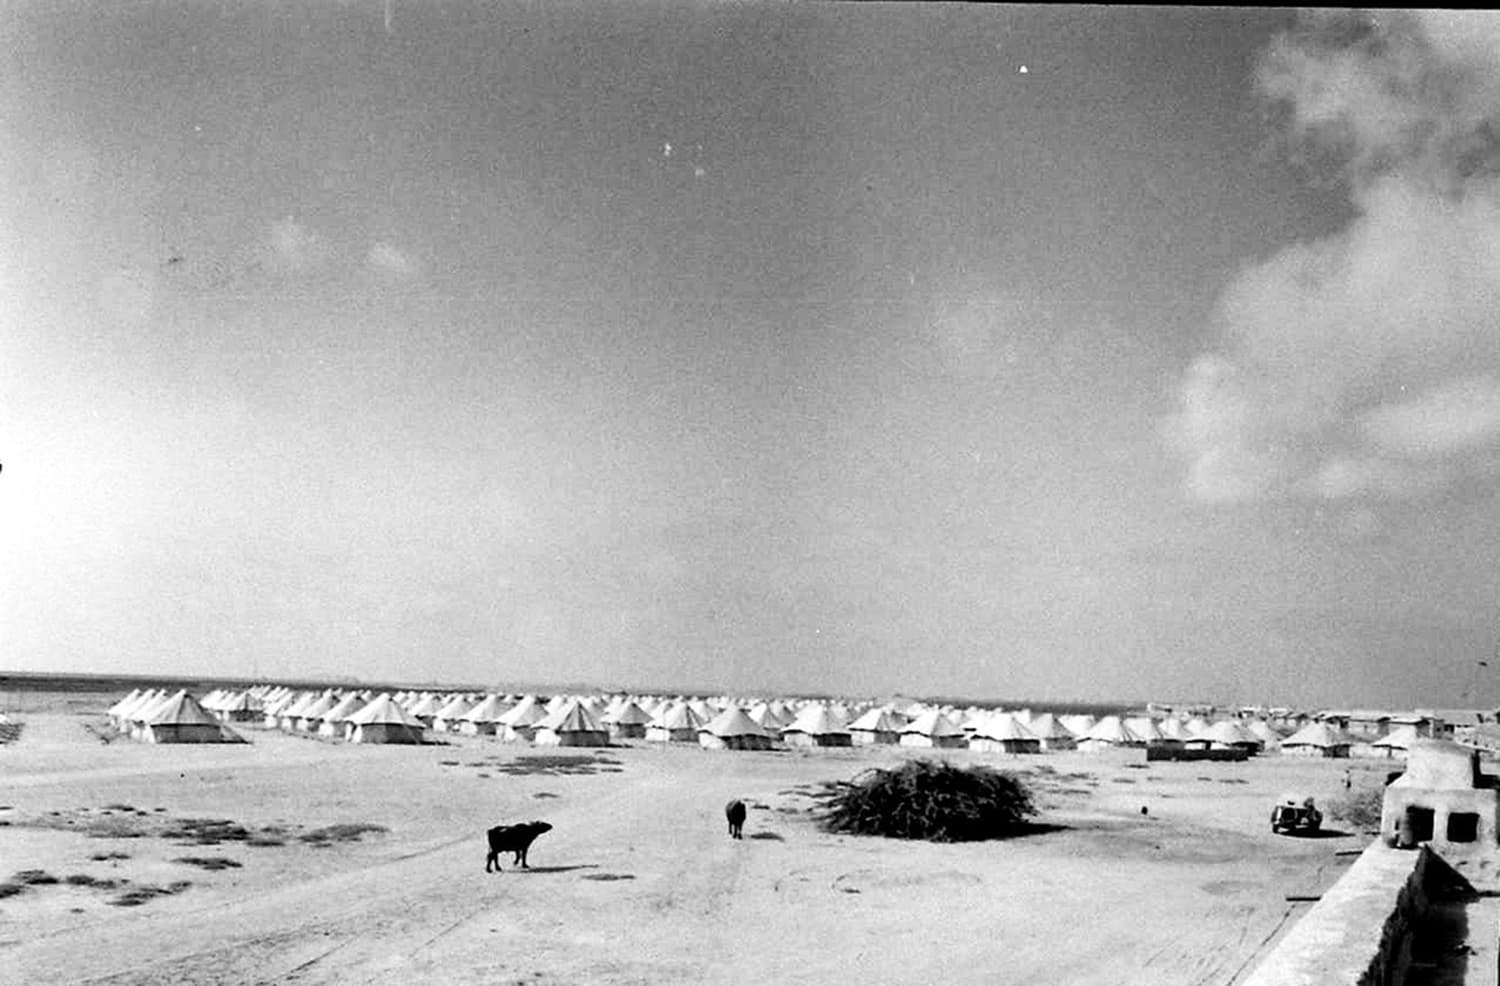 Karachi, 1948: An open area dotted by hundreds of temporary camps, housing government officials who ran matters of the country and the city from inside these dusty tents. Source: Pakistan’s Capital (A feature in 'LIFE' Magazine’s June, 1948 issue).